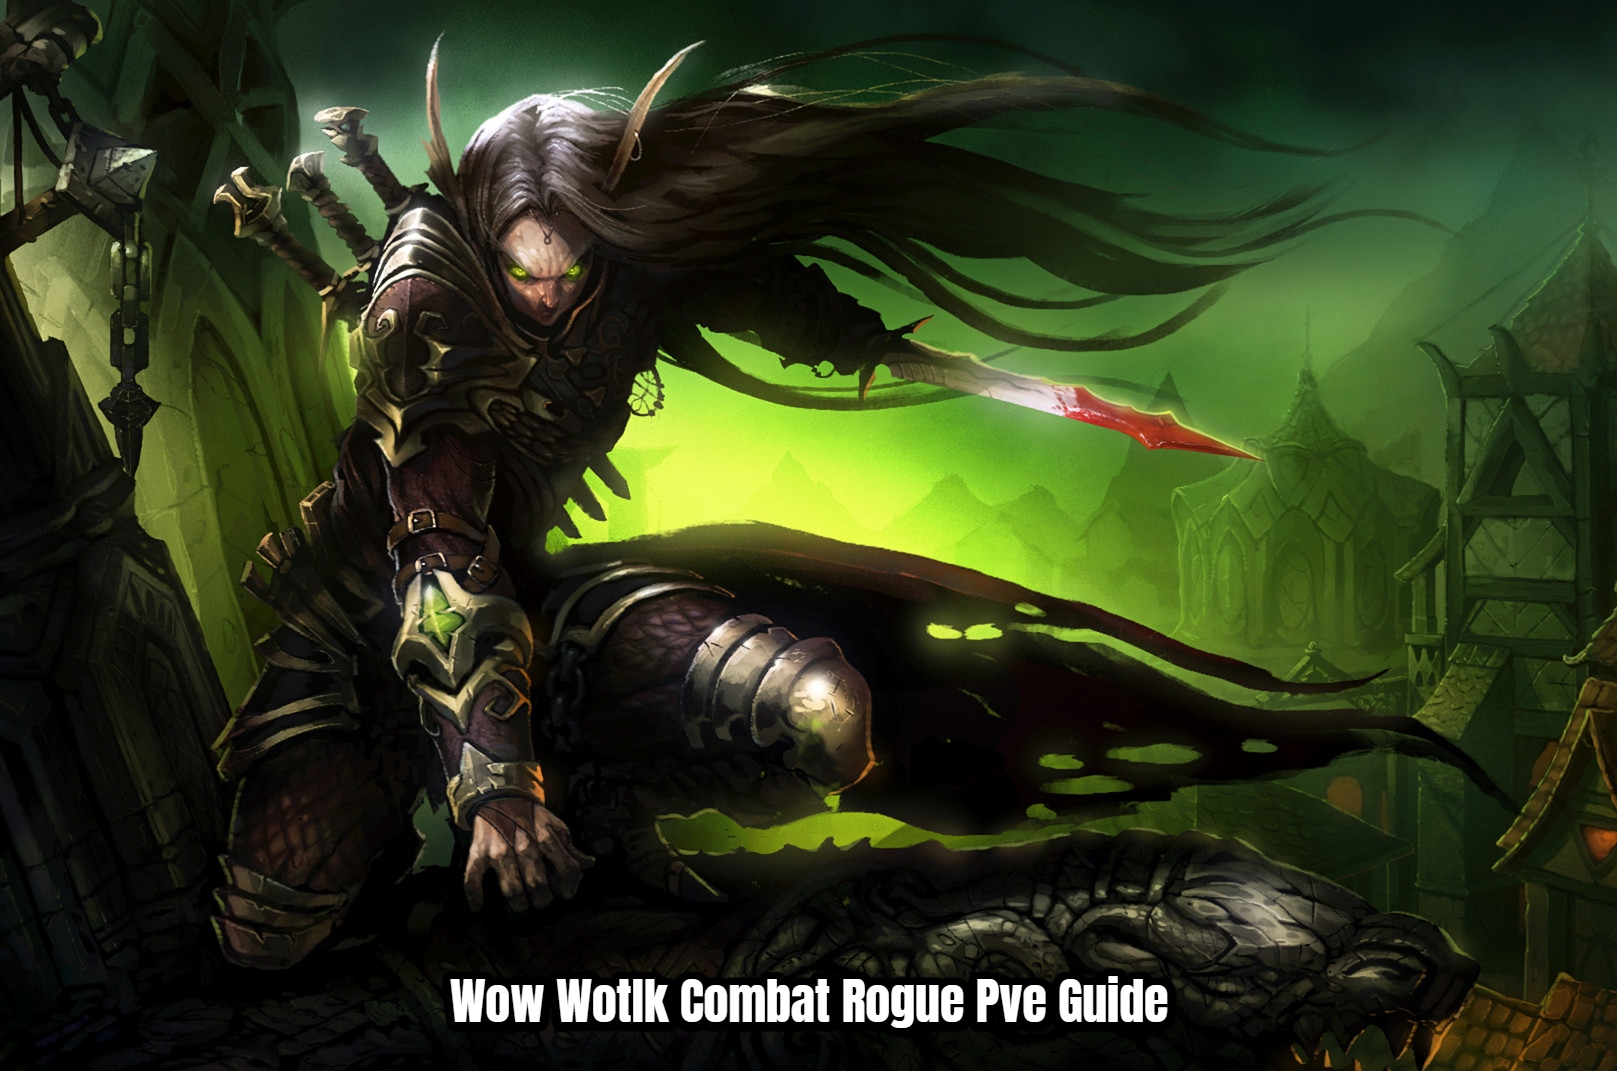 You are currently viewing Wow Wotlk Combat Rogue Pve Guide